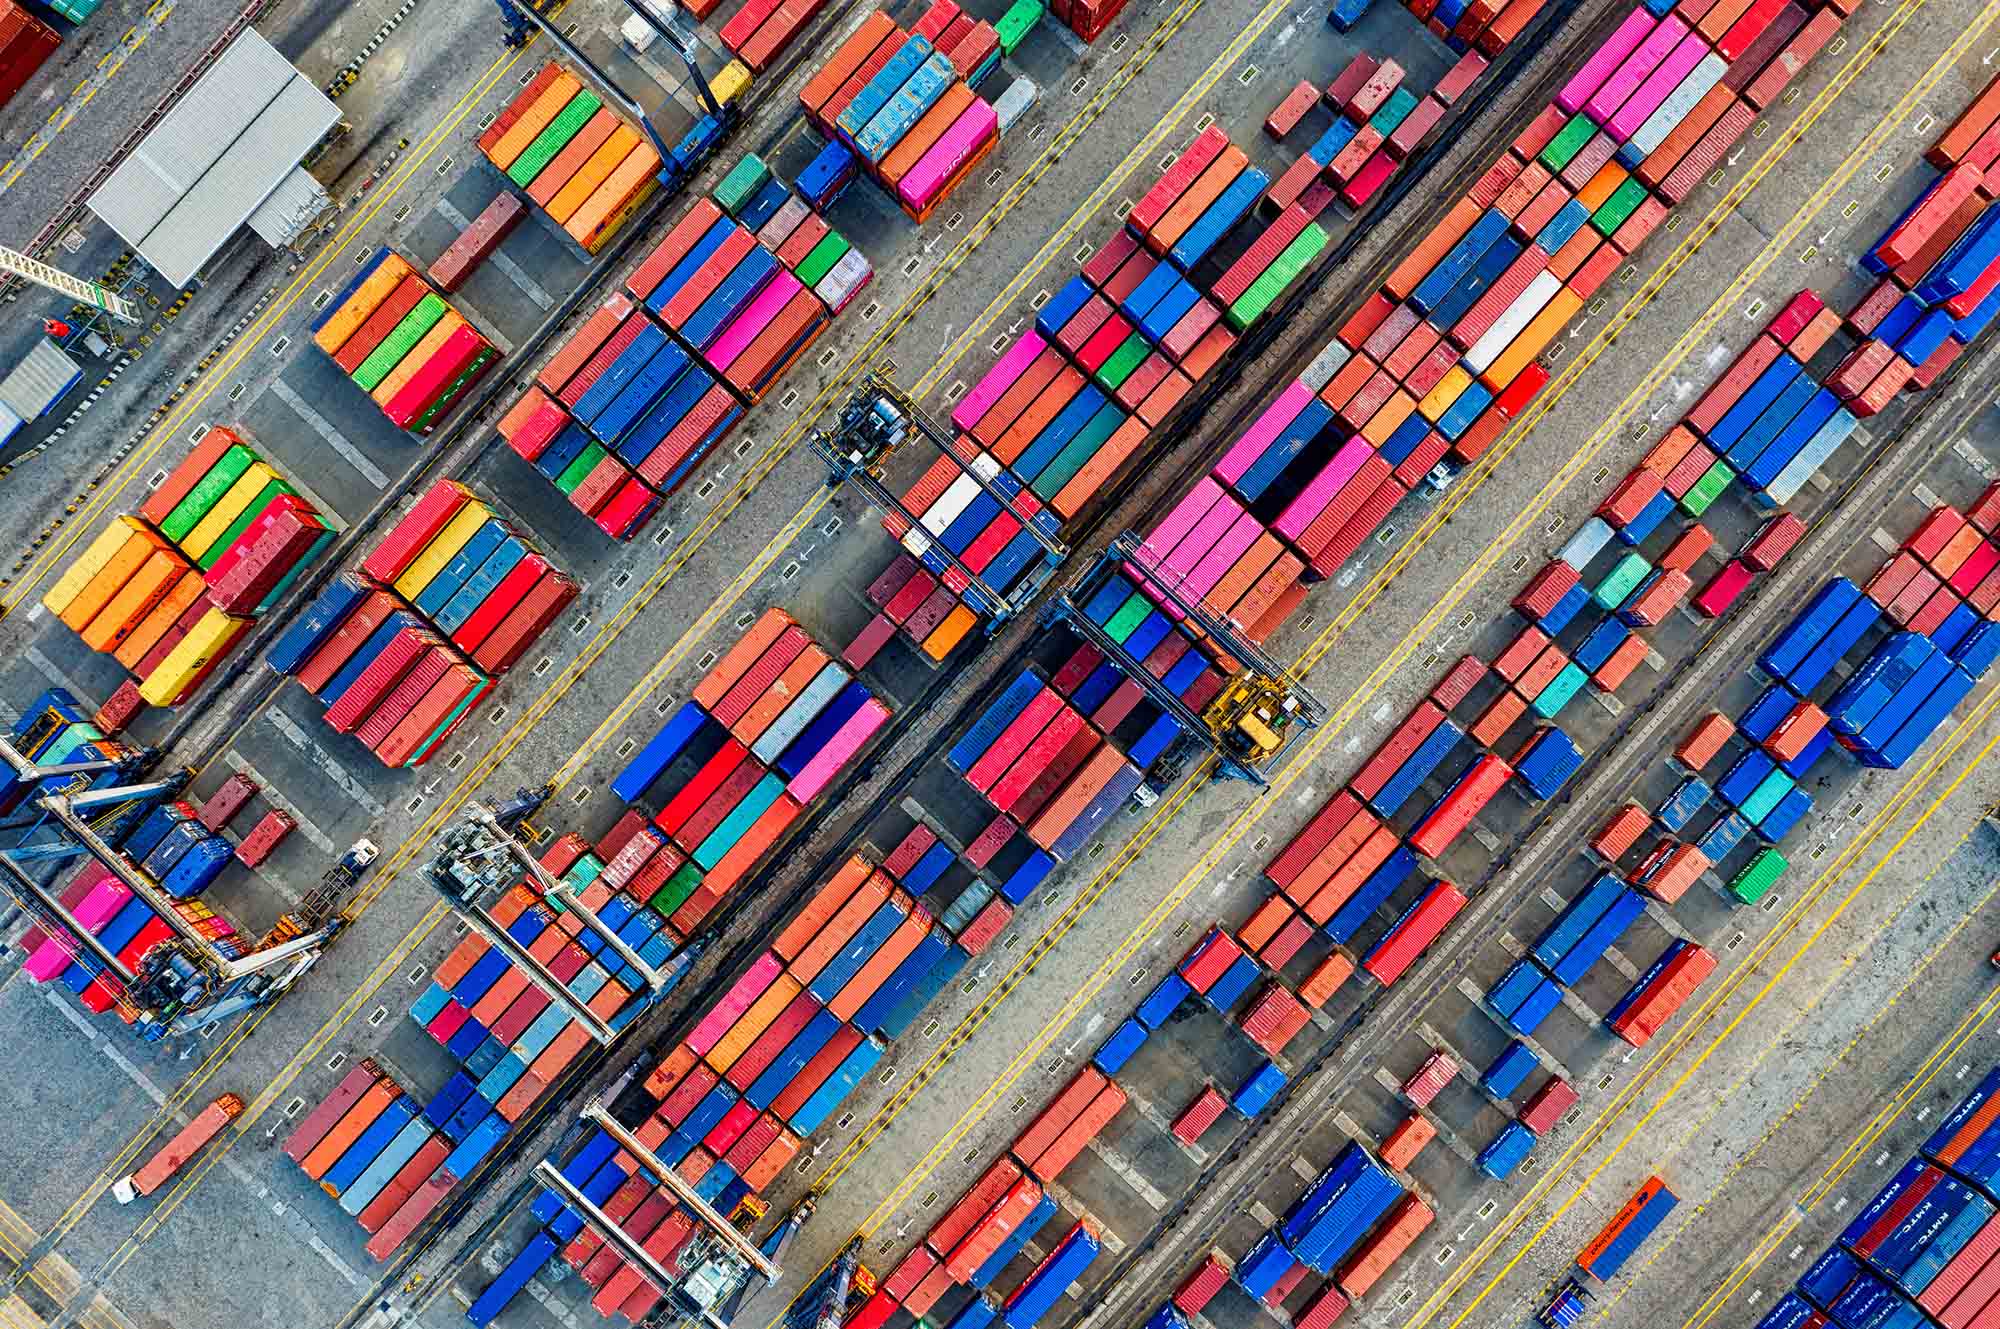 Containers-200